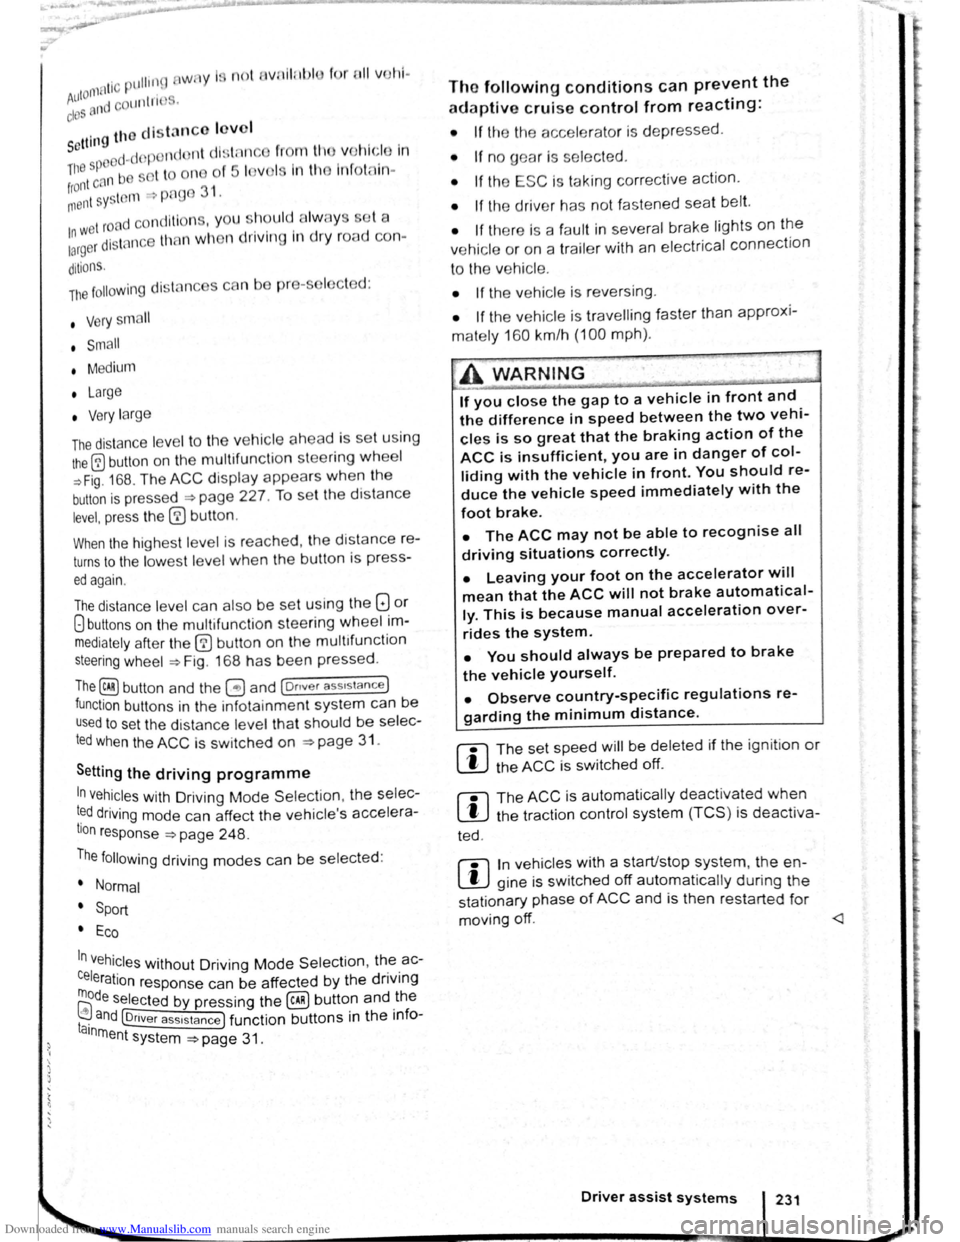 VOLKSWAGEN SCIROCCO 2008 Owners Manual Downloaded from www.Manualslib.com manuals search engine ,,nti pttllinfl W• y I not wnllniJI  for tdl vo h l-
fltllOI  · and cOtllltJJ( ciOS · 
. g th o clist::tnco lo vo l sett Ill 
P d -d O I n